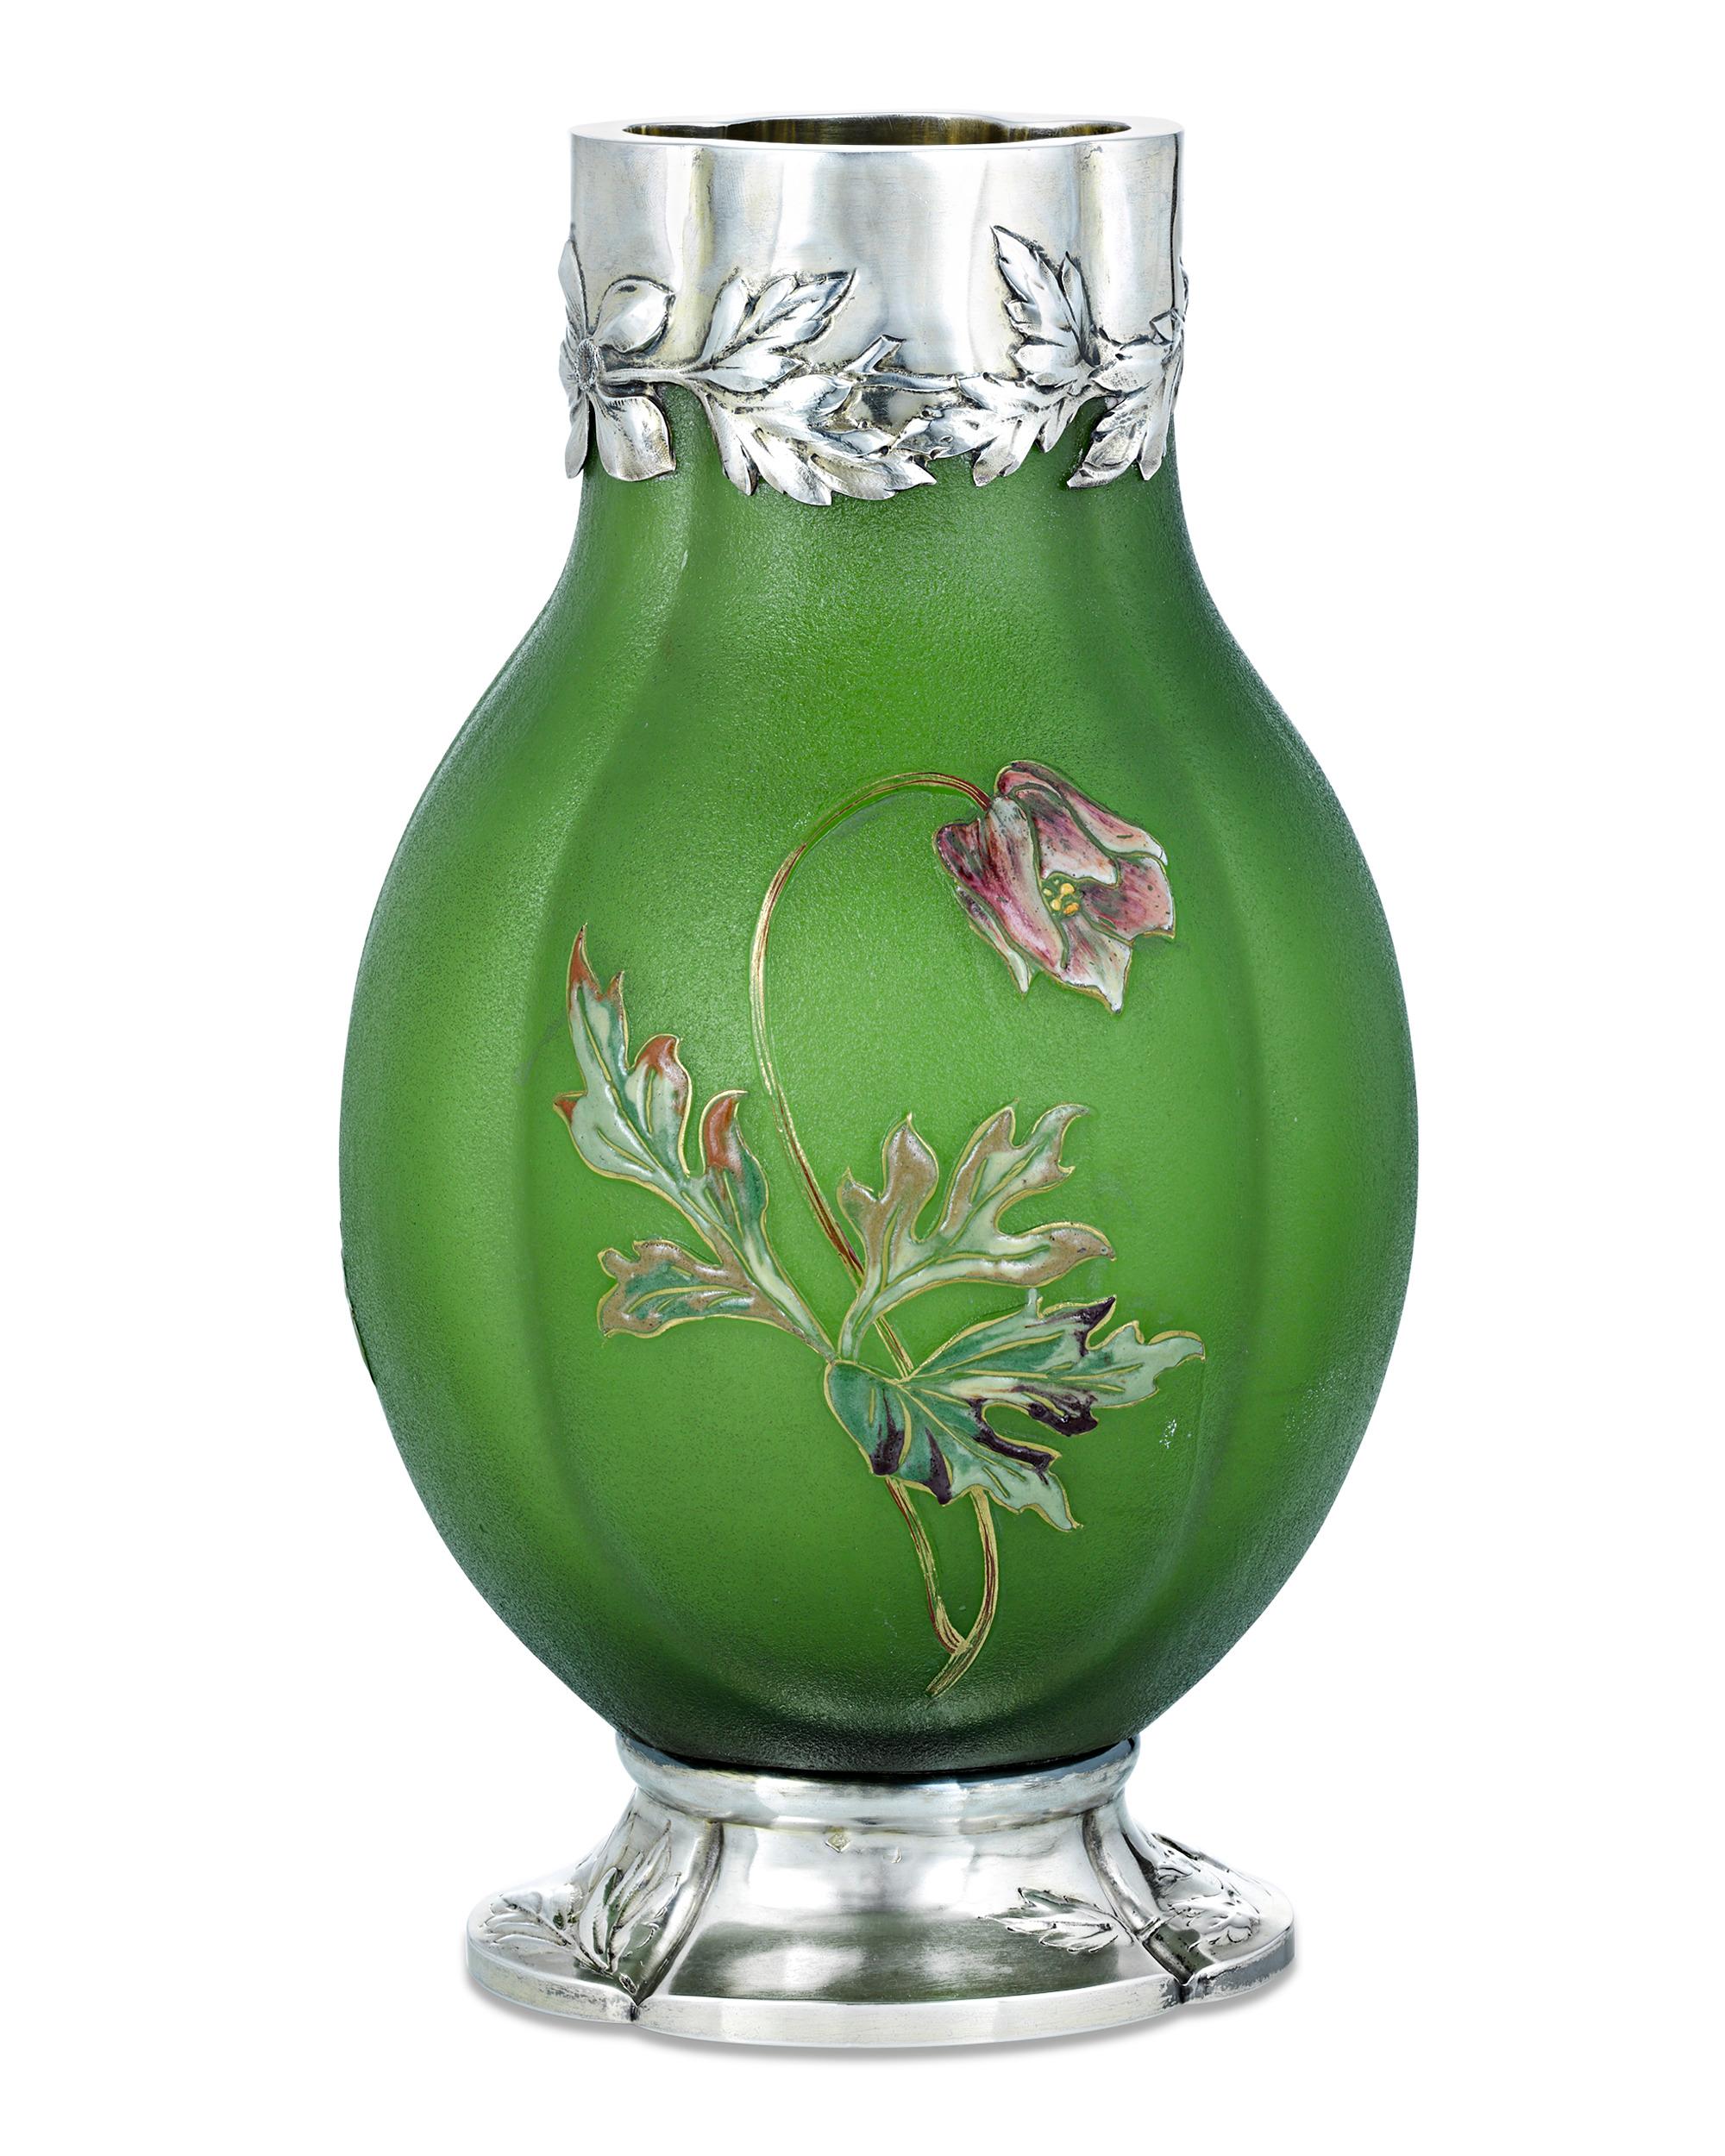 Sterling silver adds a luxurious touch to this rare art glass vase by the incomparable French glass master Émile Gallé. Its bright green body is accentuated by colorful cameo wildflowers in a motif that extends to the silver rim and base. Bearing